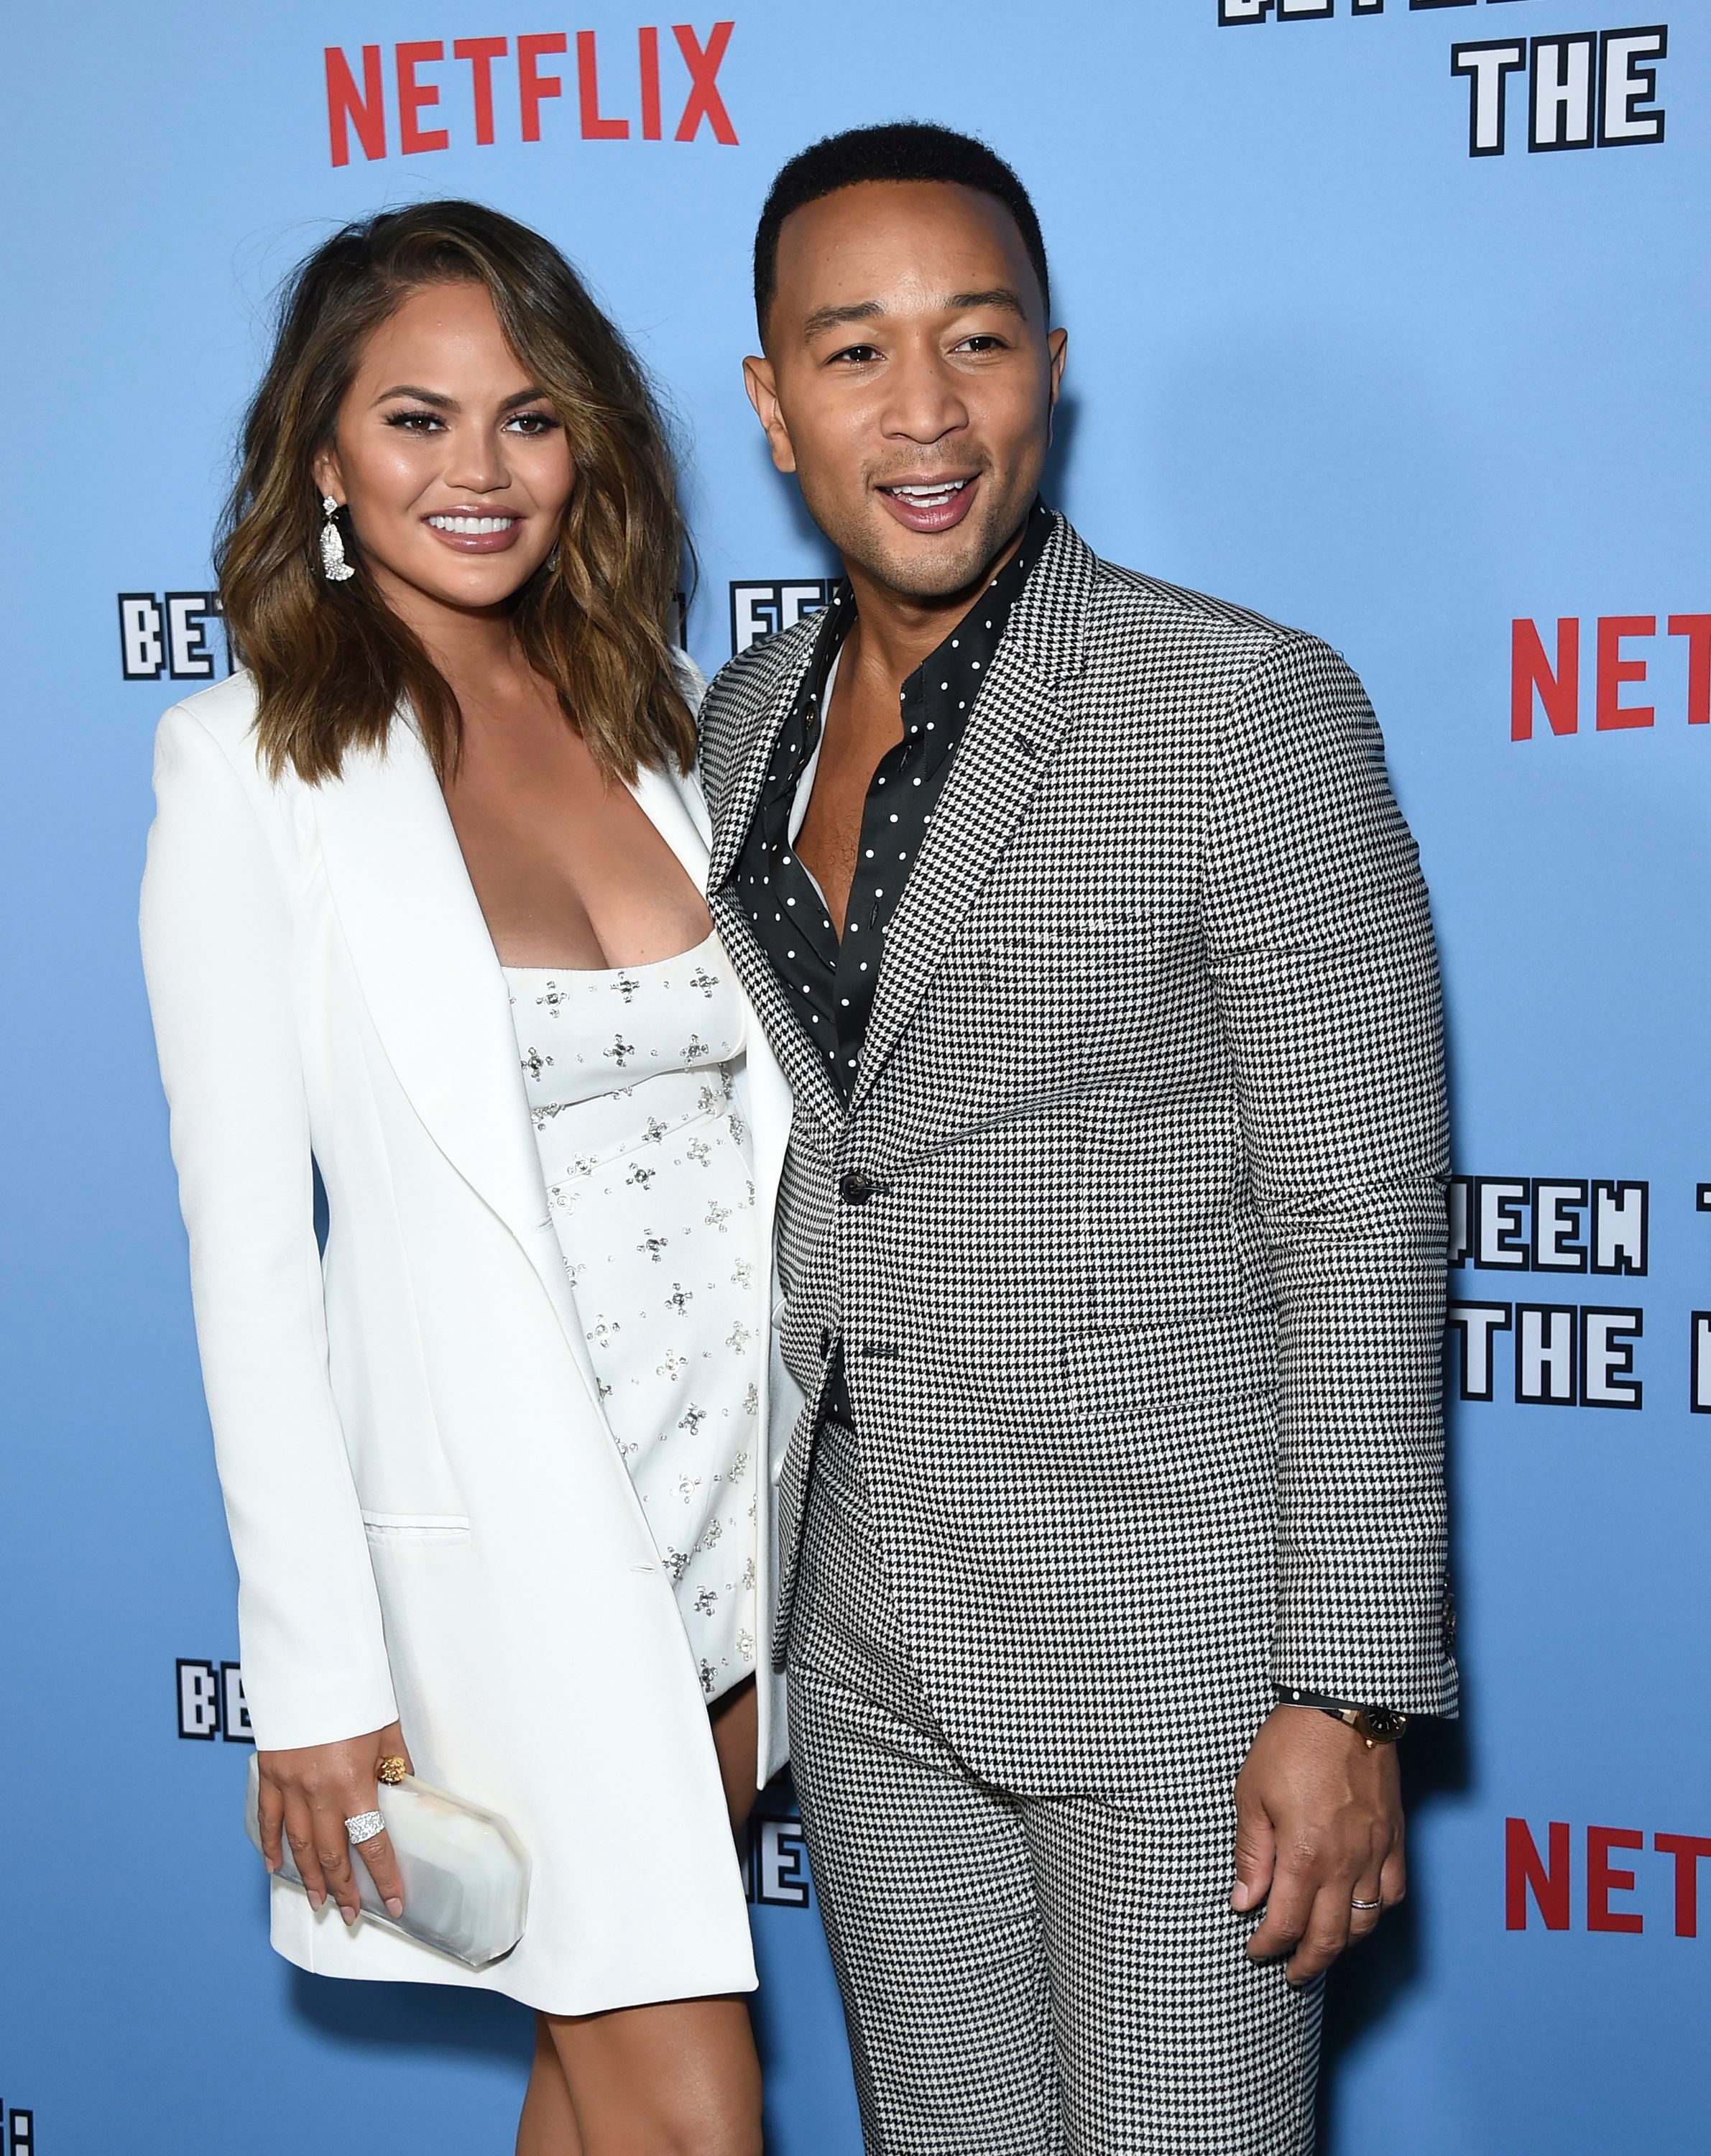 <p>Chrissy Teigen was a 21-year-old catalog model when she was hired to star in the 2007 music video for John Legend's hit "Stereo." "I walked into John's dressing room to meet him, and he was ironing in his underwear," she told Cosmopolitan in 2014. "I said, 'You do your own ironing?!' He said, 'Of course I do.' I gave him a hug." They talked during the 14-hour shoot -- in which they danced together, her in lingerie -- and had In-N-Out burgers late-night at his hotel. "I'm not going to lie. We hooked up," she admitted. But she didn't try to get him to commit. He went on tour, and though they talked while he was away, "I let him be himself for a while. The worst thing you can do is try to lock someone like that down early on, then have them think, 'There's so much more out there.' I played it cool for a long time. Never once did I ask, 'What are we?' Marriage was never my goal, because I've never been very traditional. I was just happy to be with him." Nevertheless, the pair married in 2013 and now have two kids.</p>